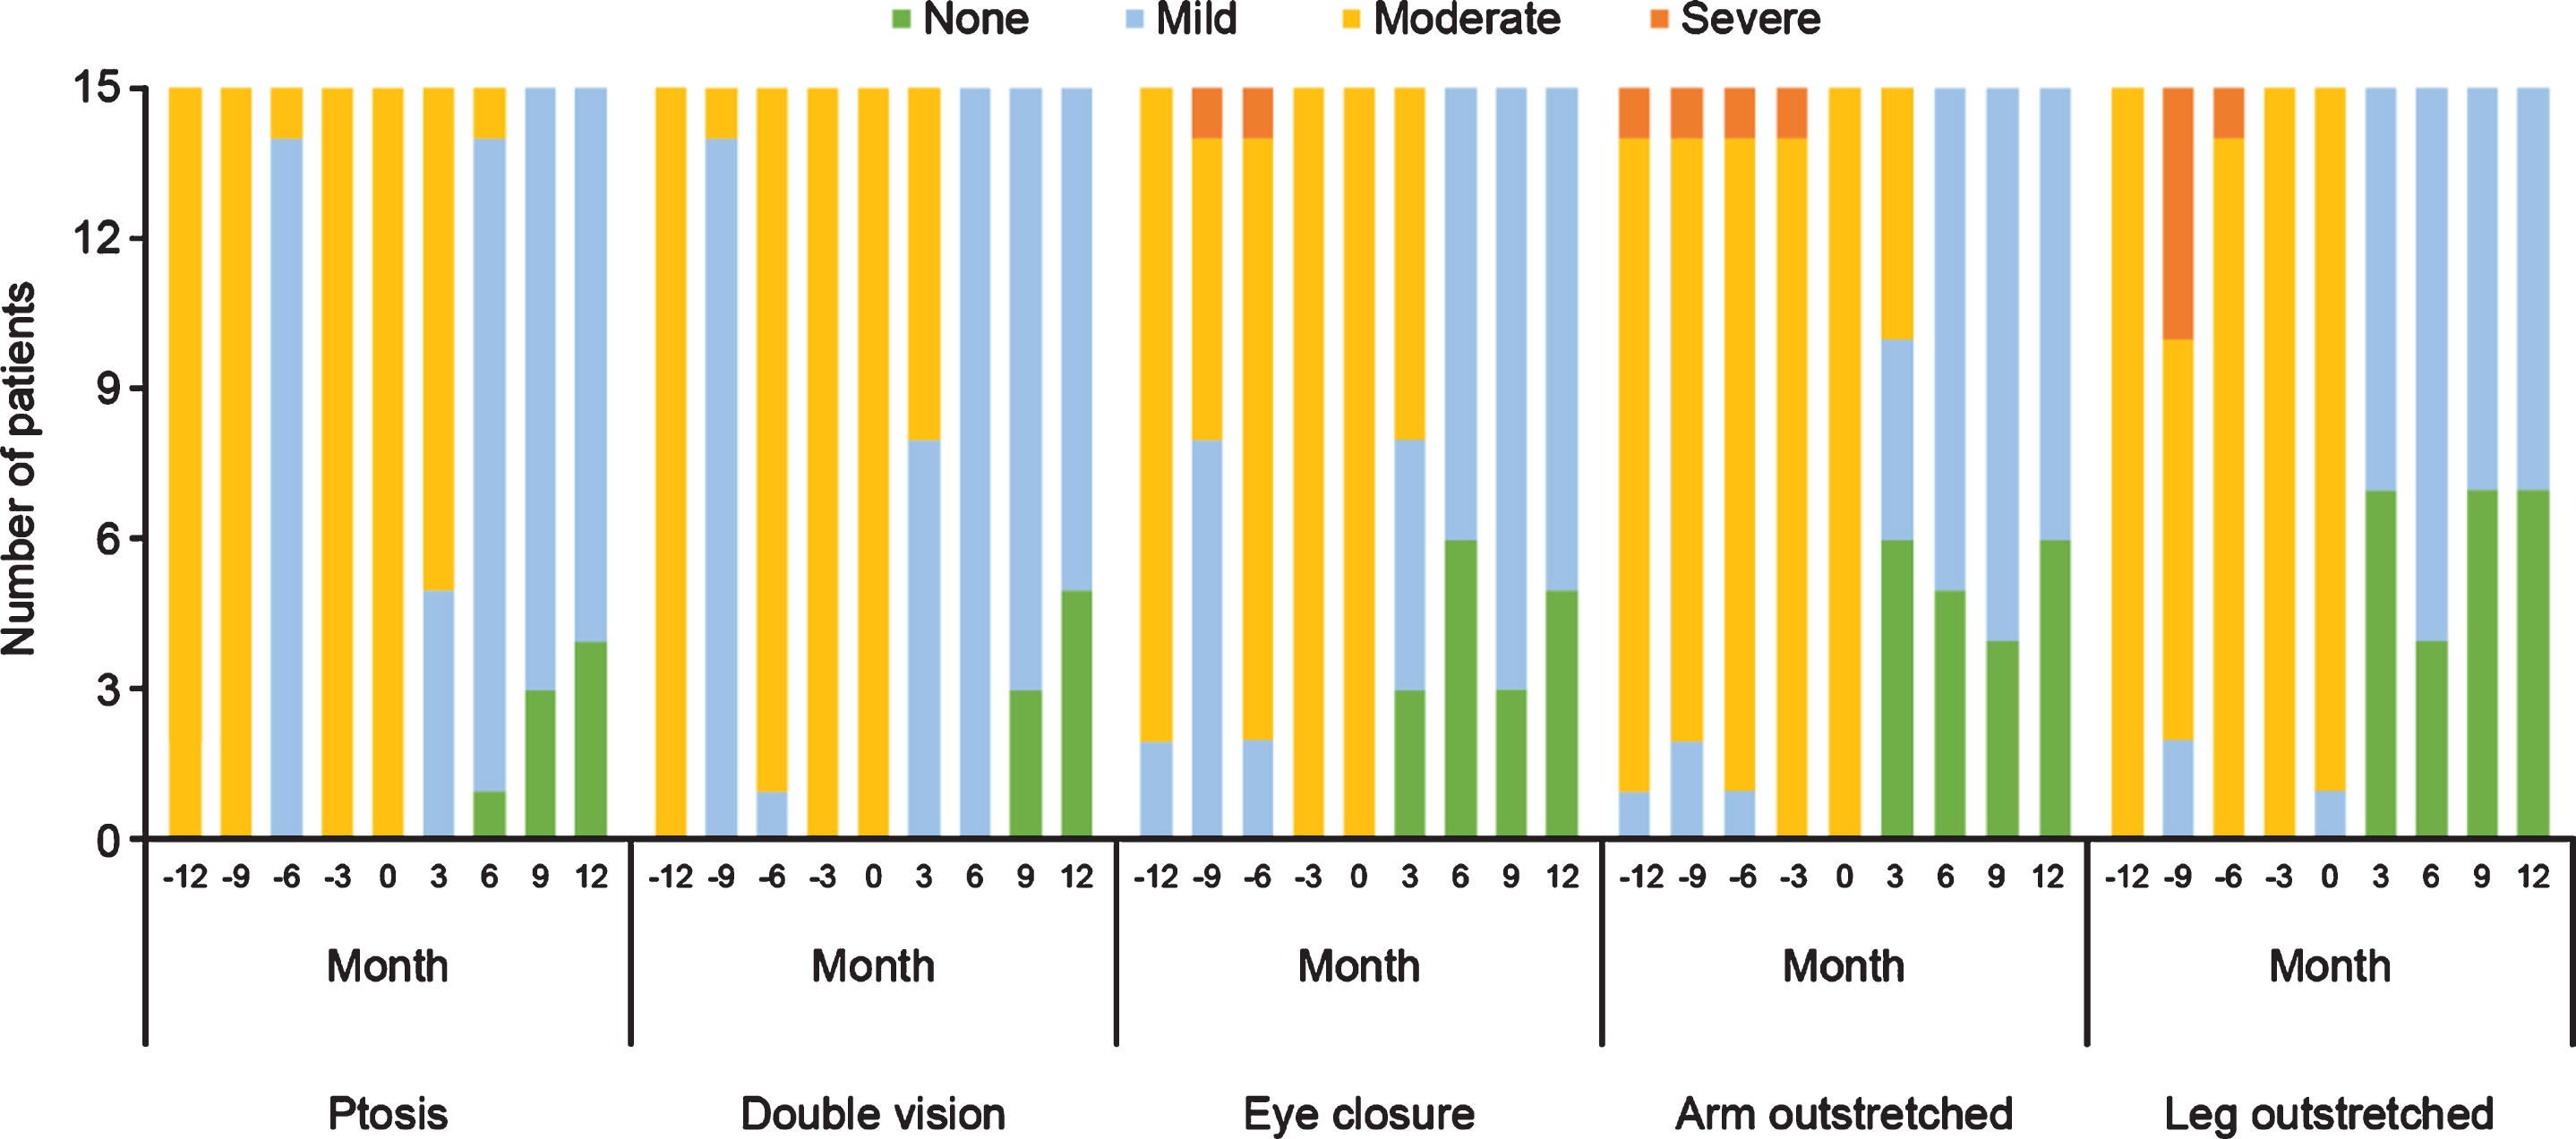 Qualitative physical assessments of selected items from the QMG evaluation before and during treatment with eculizumab in patients with acetylcholine receptor antibody-positive generalized myasthenia gravis (n = 15). QMG, Quantitative Myasthenia Gravis.